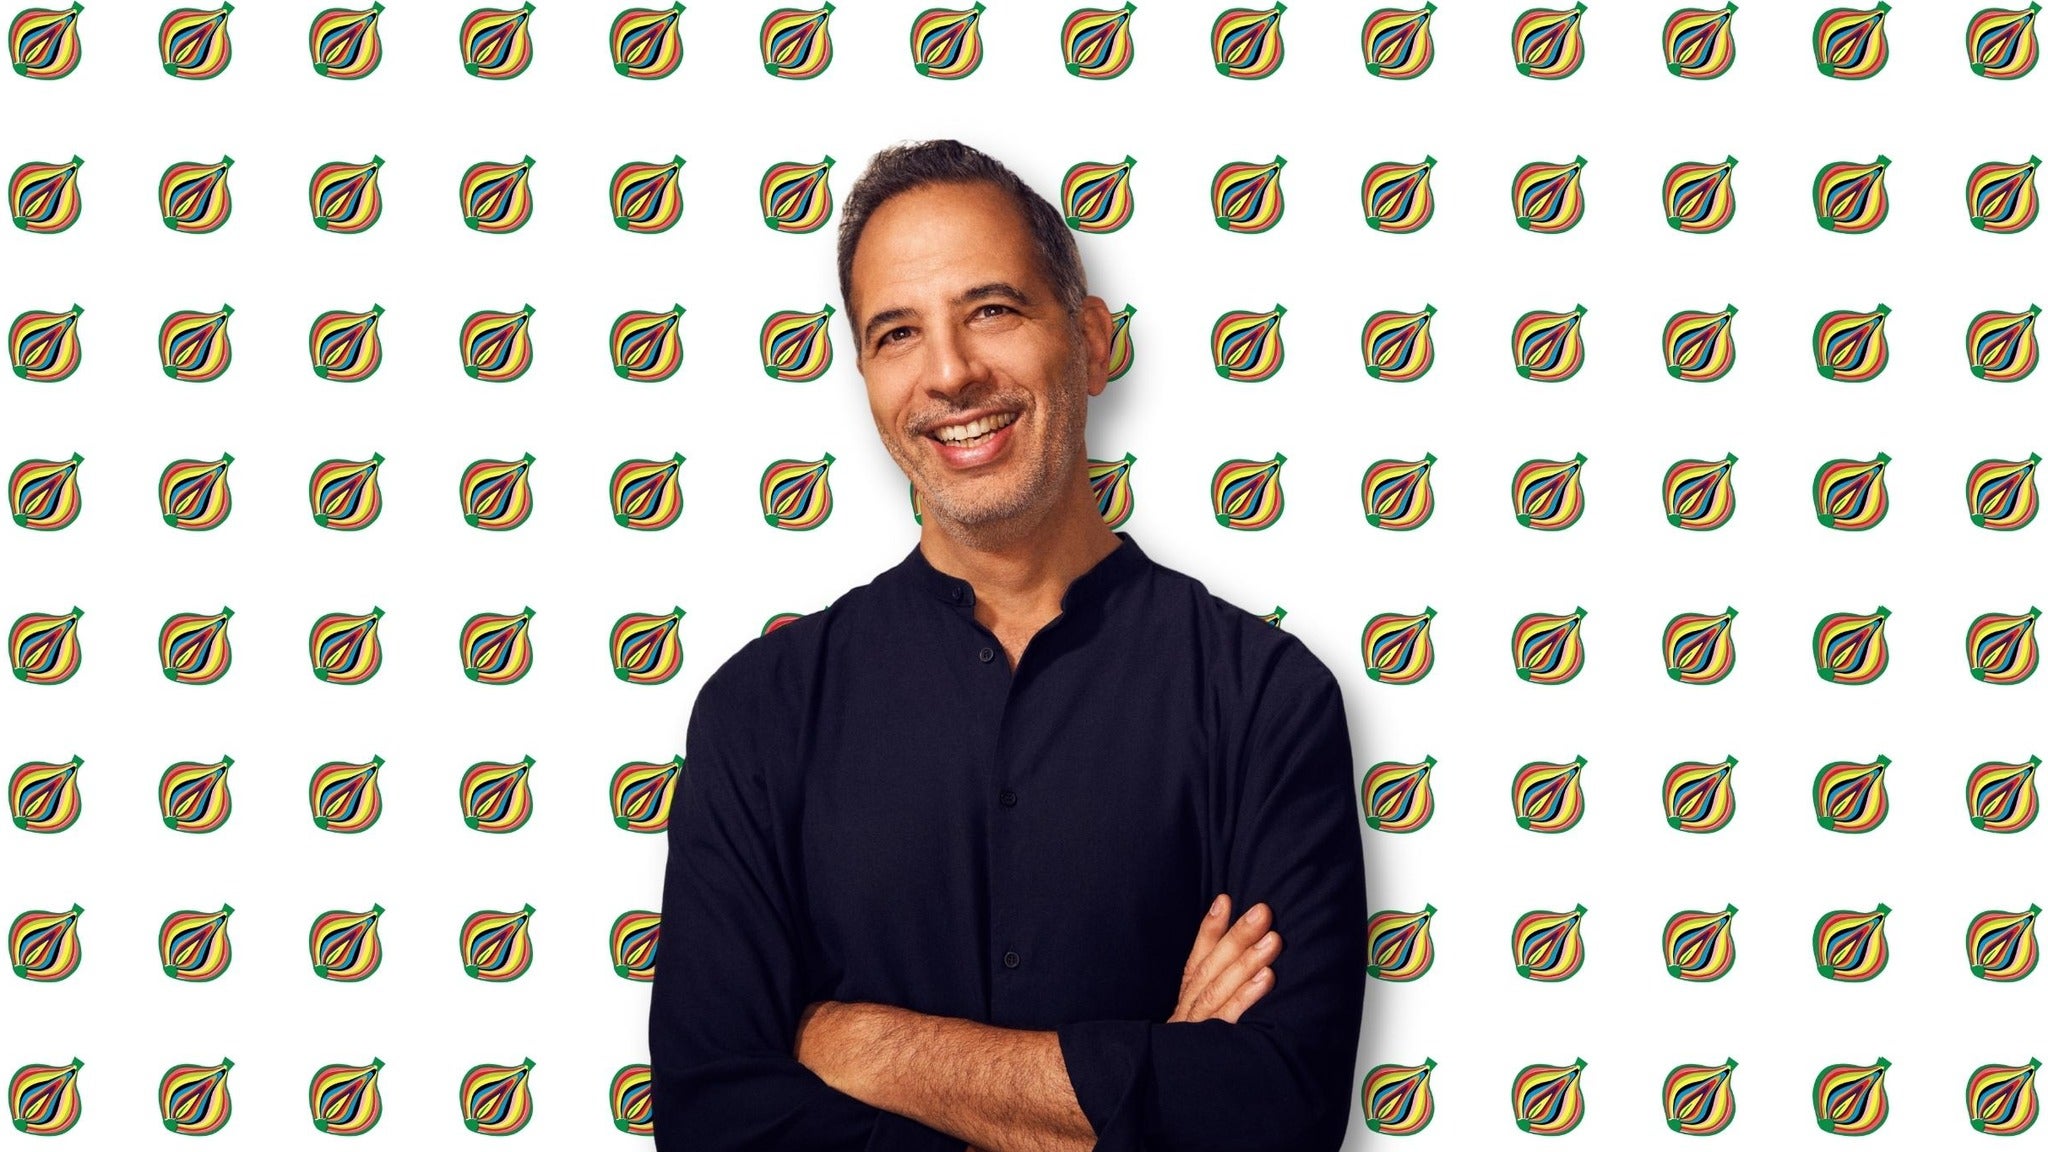 Image used with permission from Ticketmaster | Yotam Ottolenghi tickets